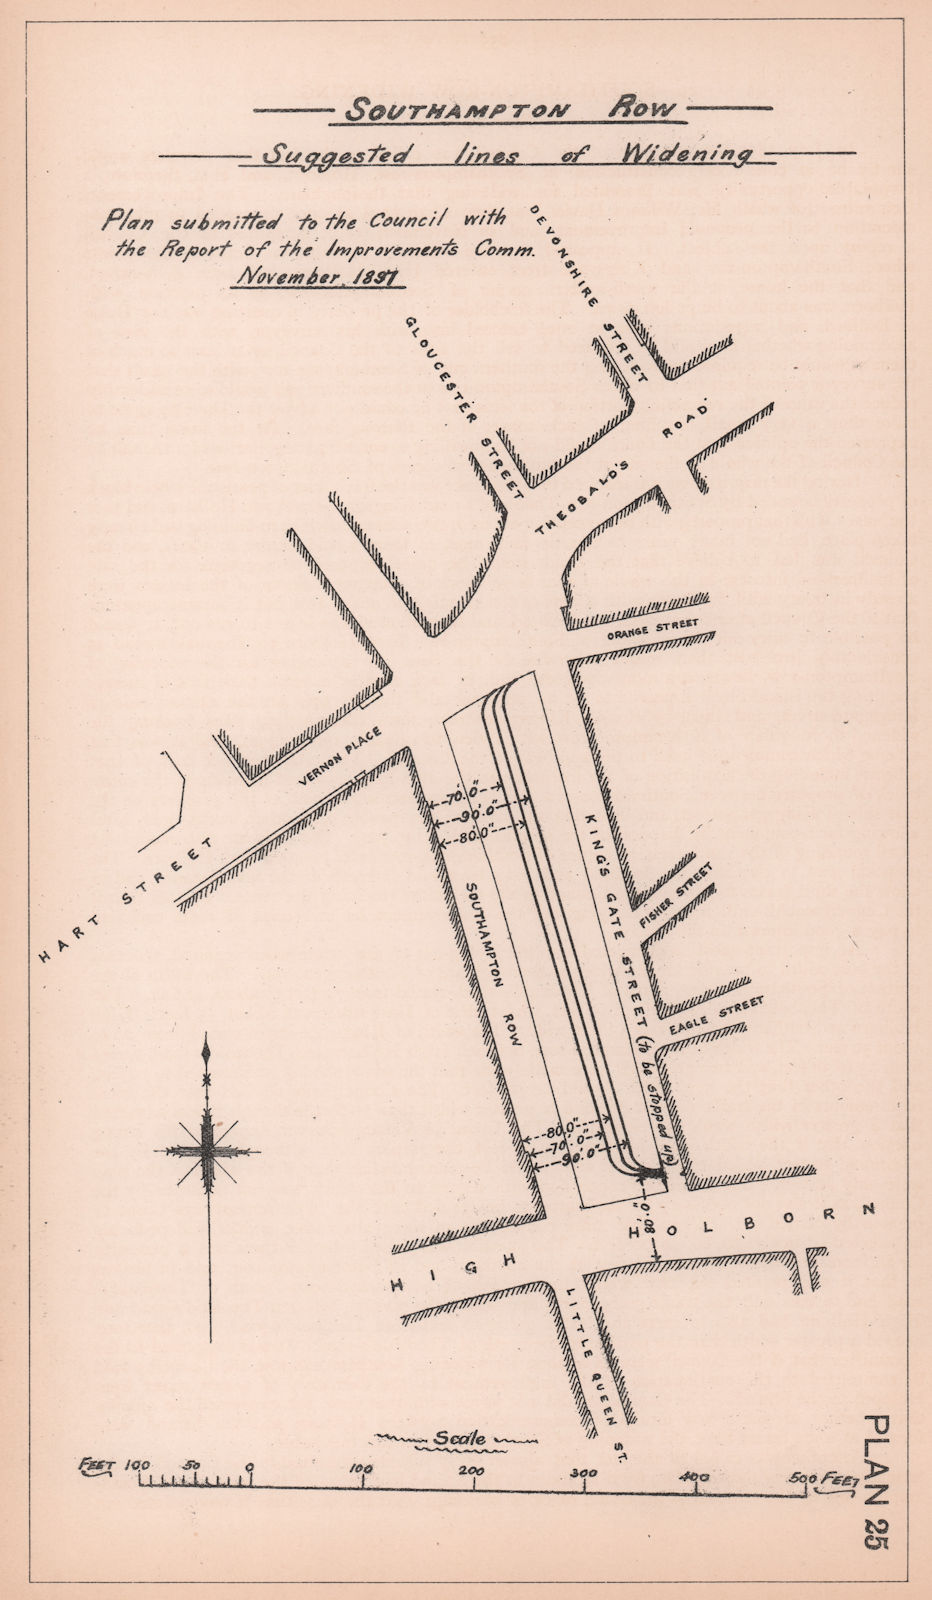 1897 Southampton Row proposed widening. Bloomsbury Way - High Holborn 1898 map